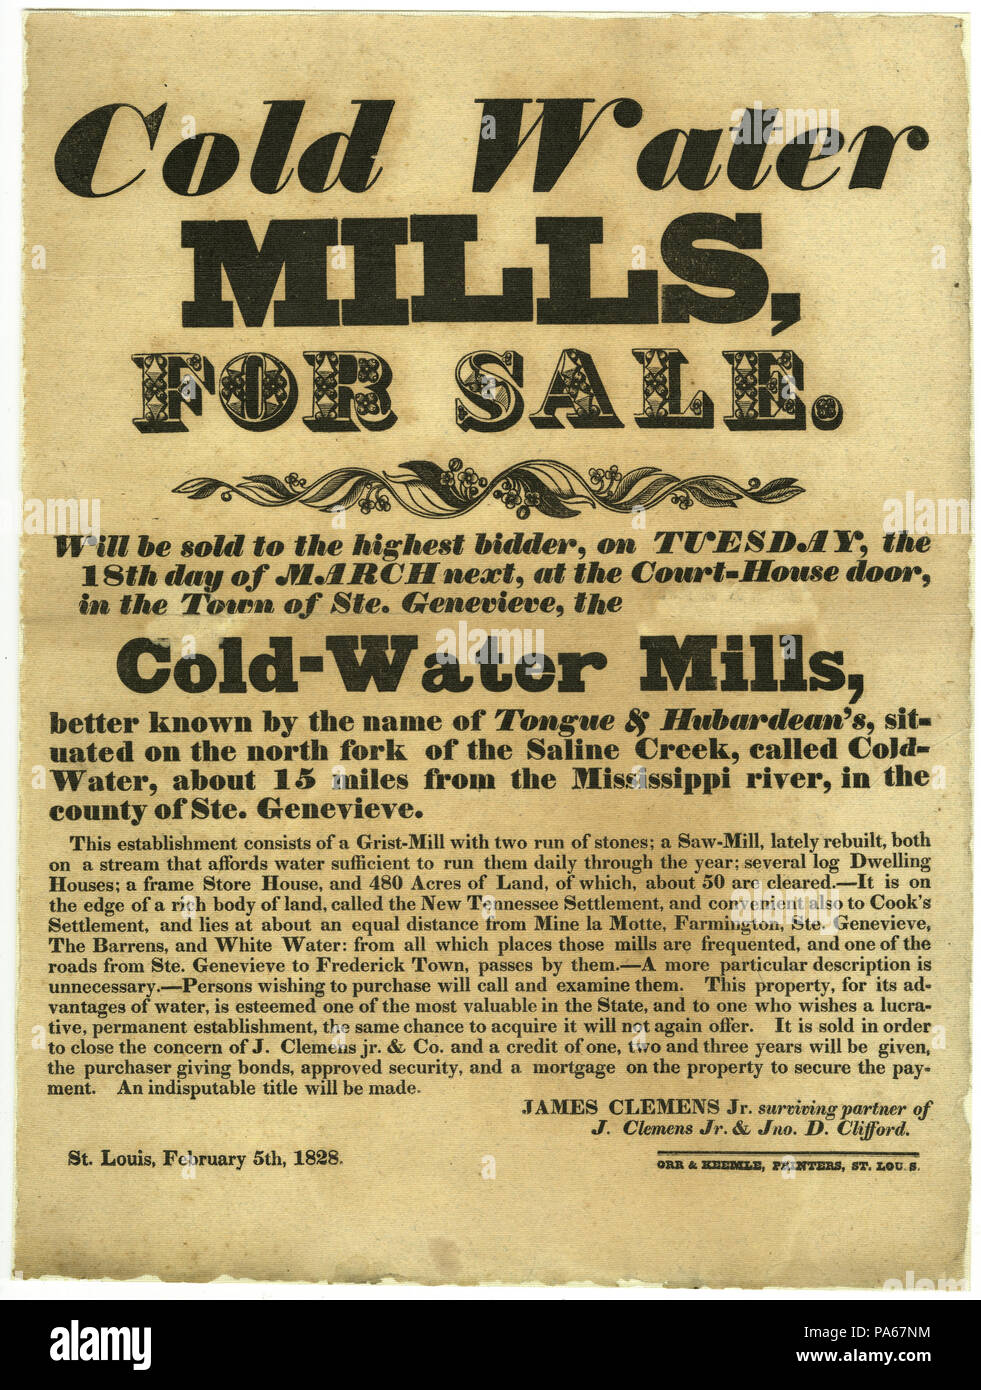 249 Broadside- Cold Water Mills for Sale, Ste. Genevieve, February 5, 1828 Stock Photo